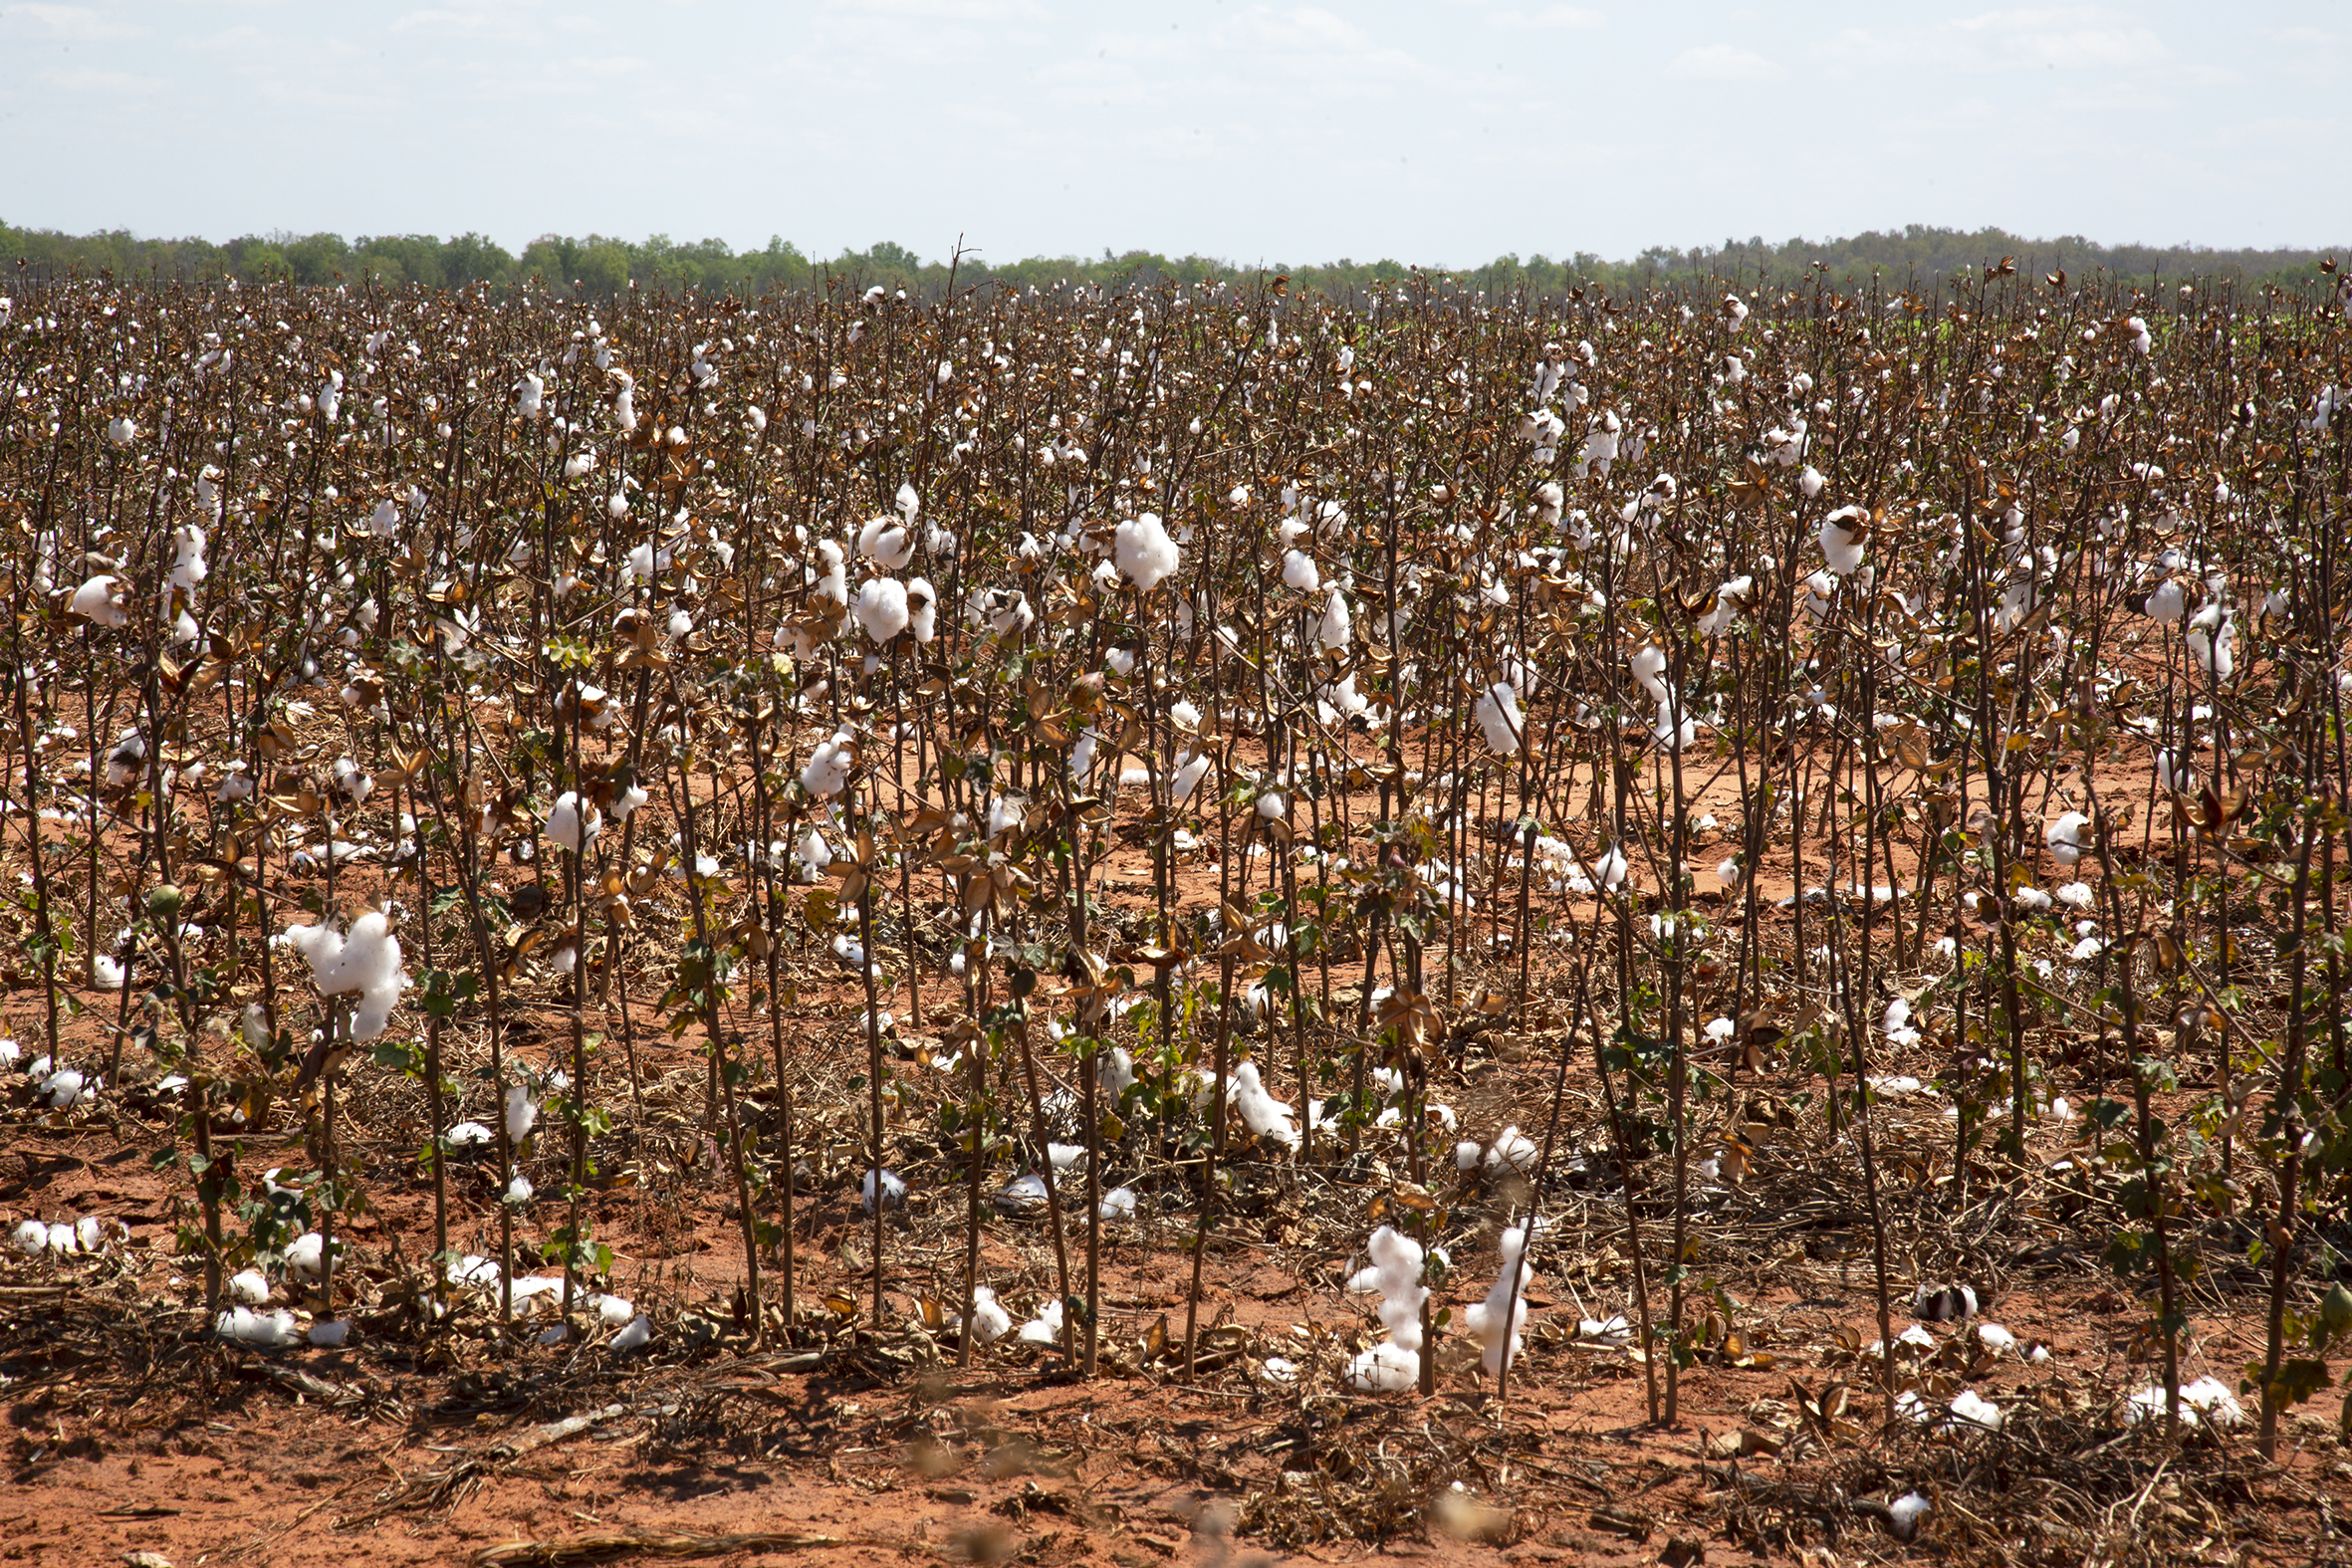 Northern Territory Government rolling out the red carpet for 100,000 hectares of cotton, fuelling more destructive land clearing